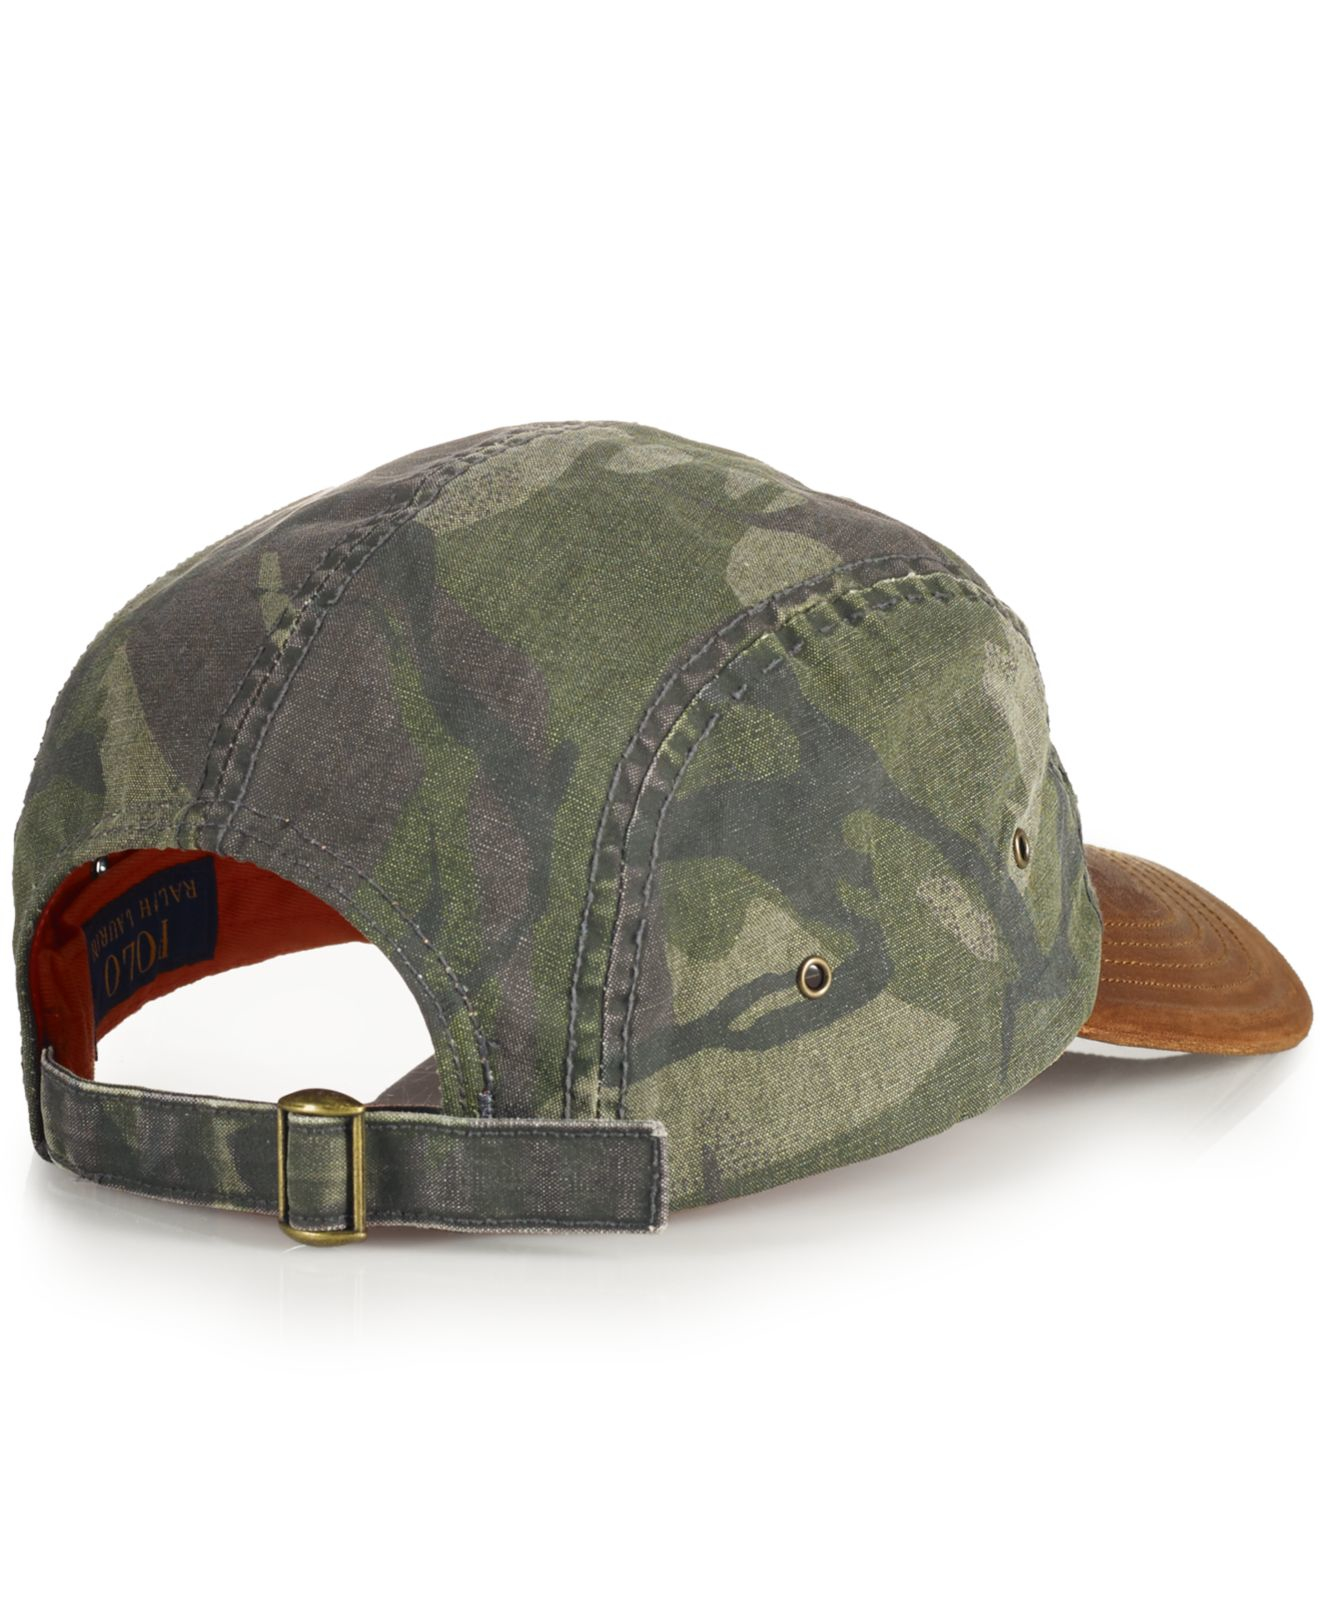 Polo Ralph Lauren Oilcloth Camp Hat in Brown for Men - Lyst